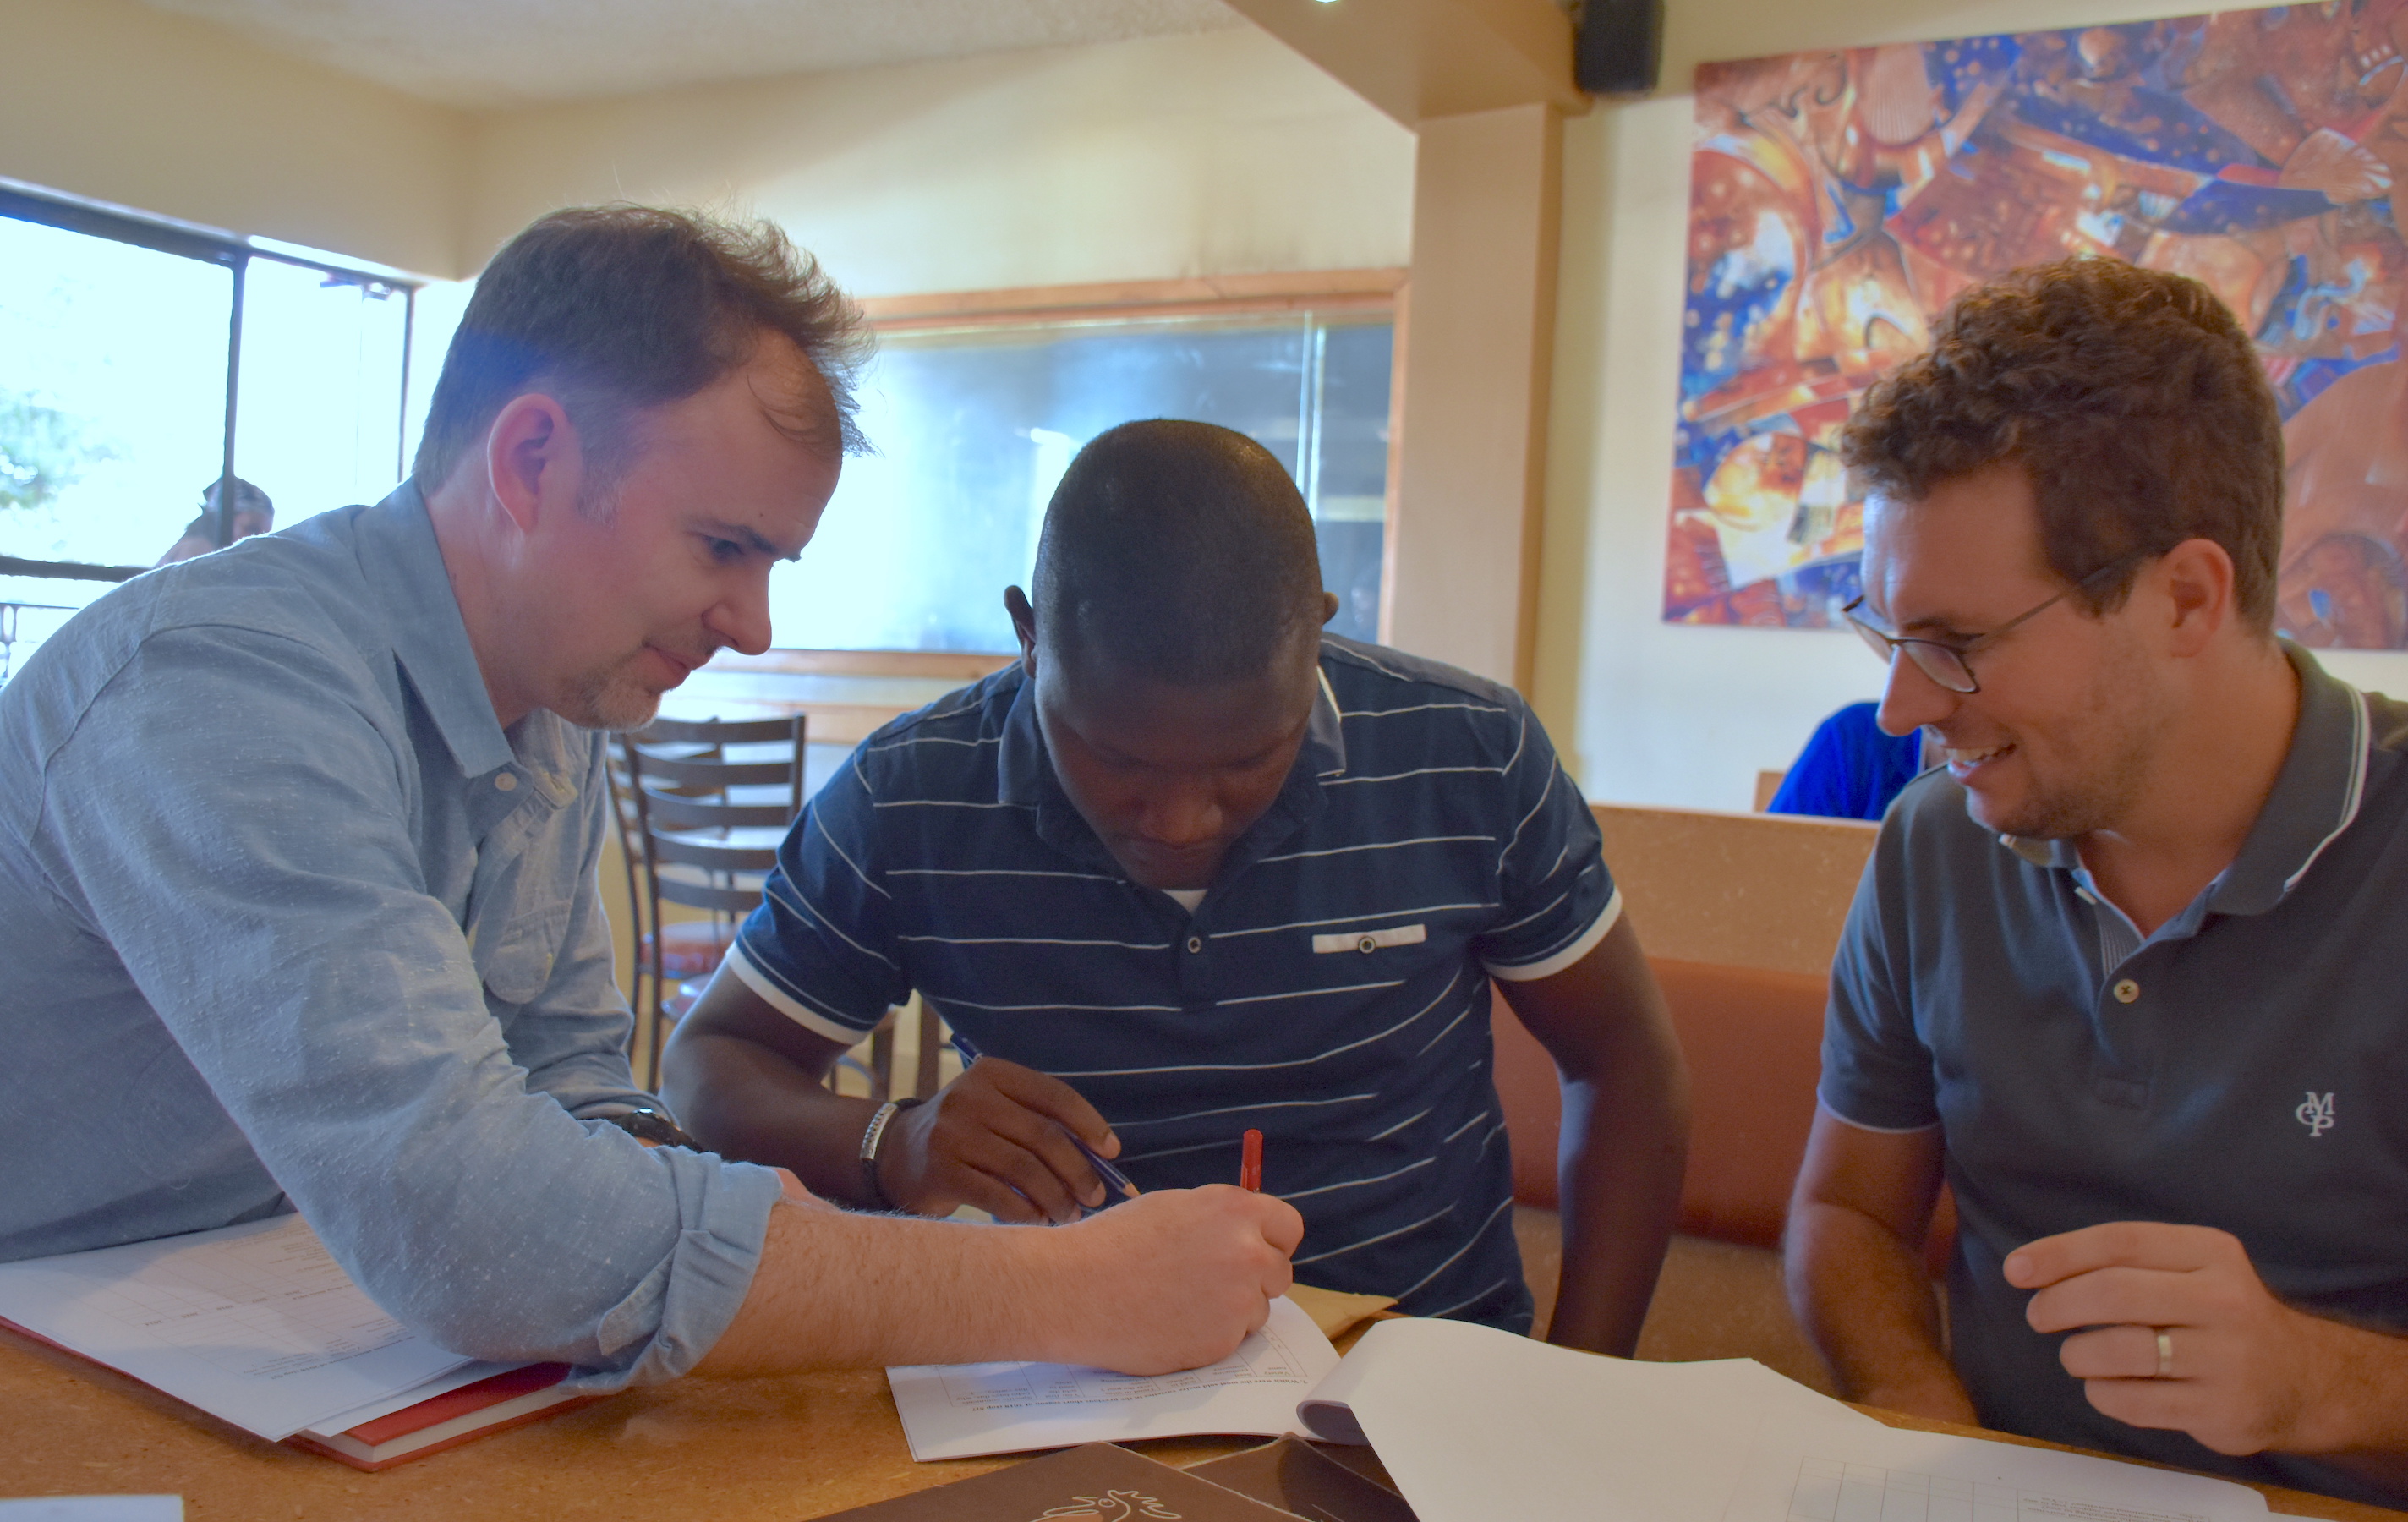 CIMMYT researchers Jason Donovan (left) and Pieter Rutsaert (right) discuss the research study questionnaire with consultant enumerator Victor Kitoto. (Photo: Jerome Bossuet/CIMMYT)